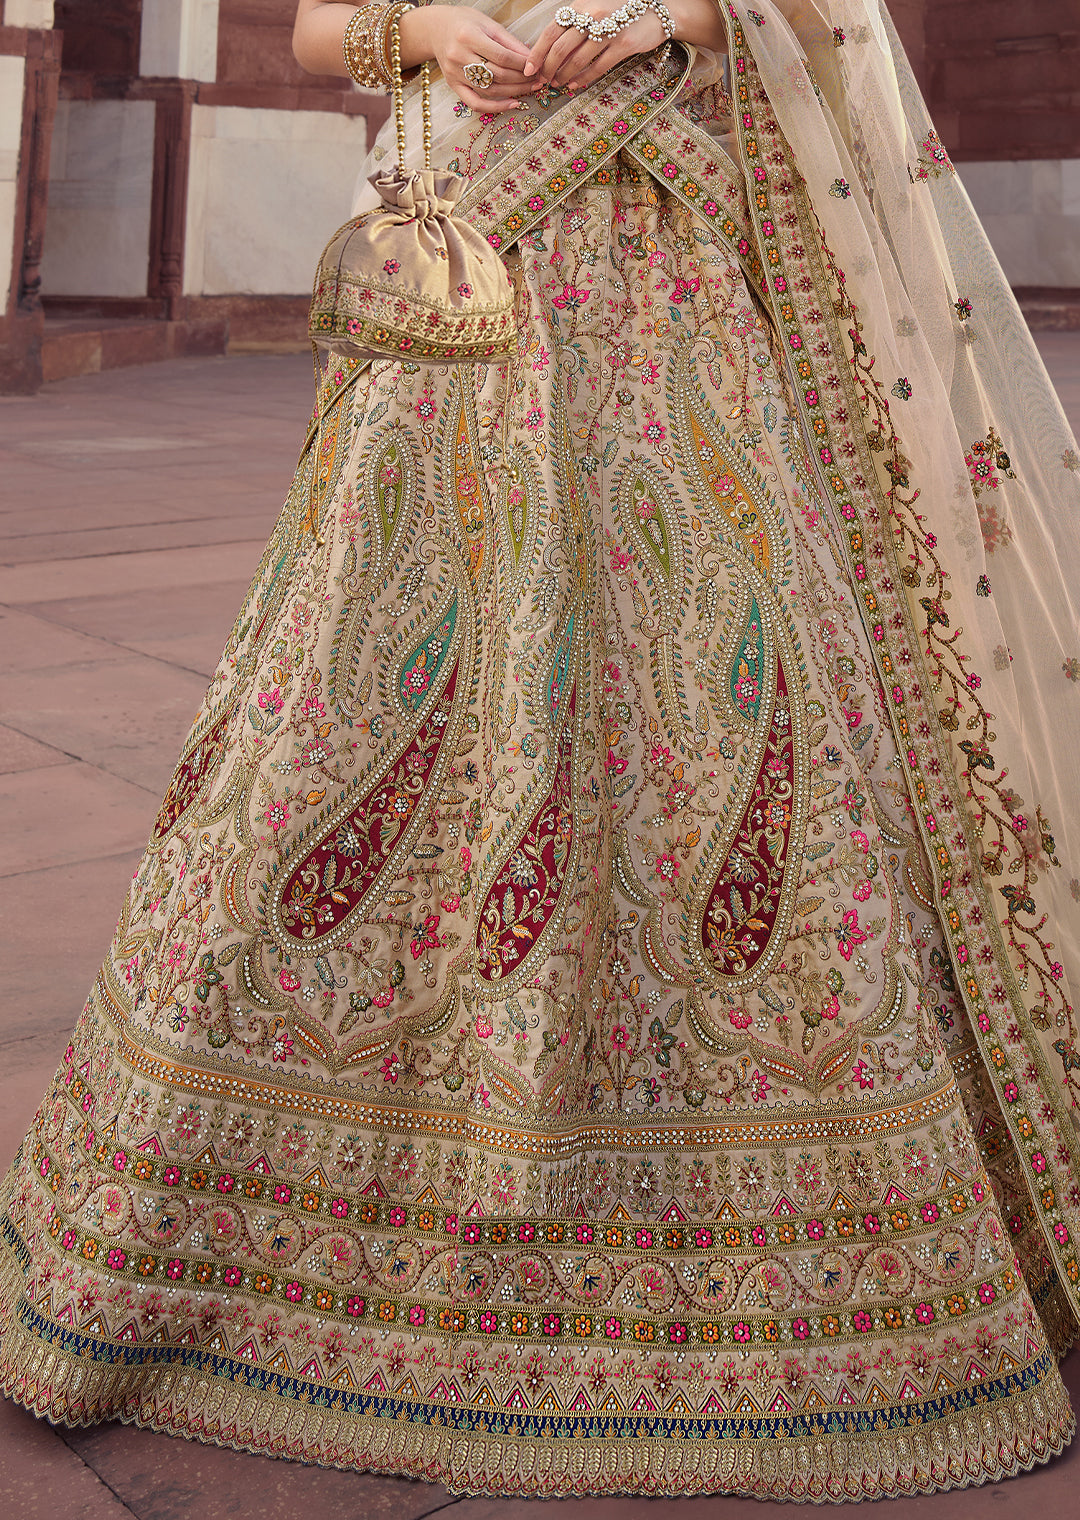 PARCHMENT OFFWHITE	HEAVY EMBROIDERED DESIGNER BRIDAL LEHENGA